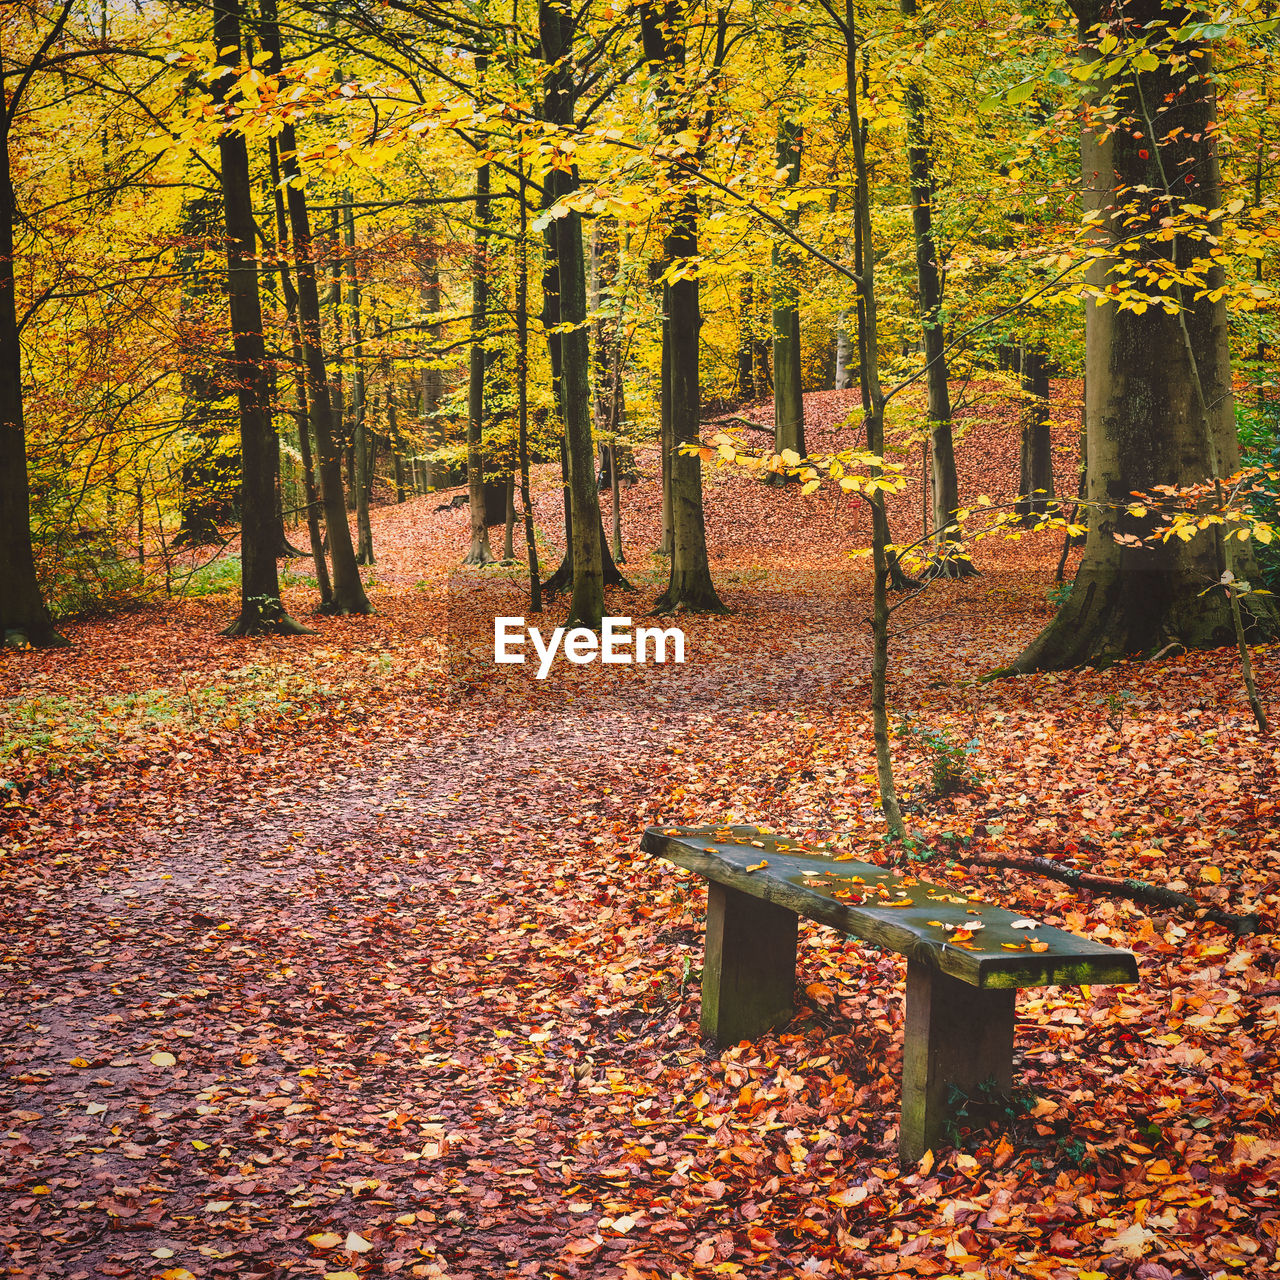 VIEW OF PARK BENCH IN AUTUMN FOREST